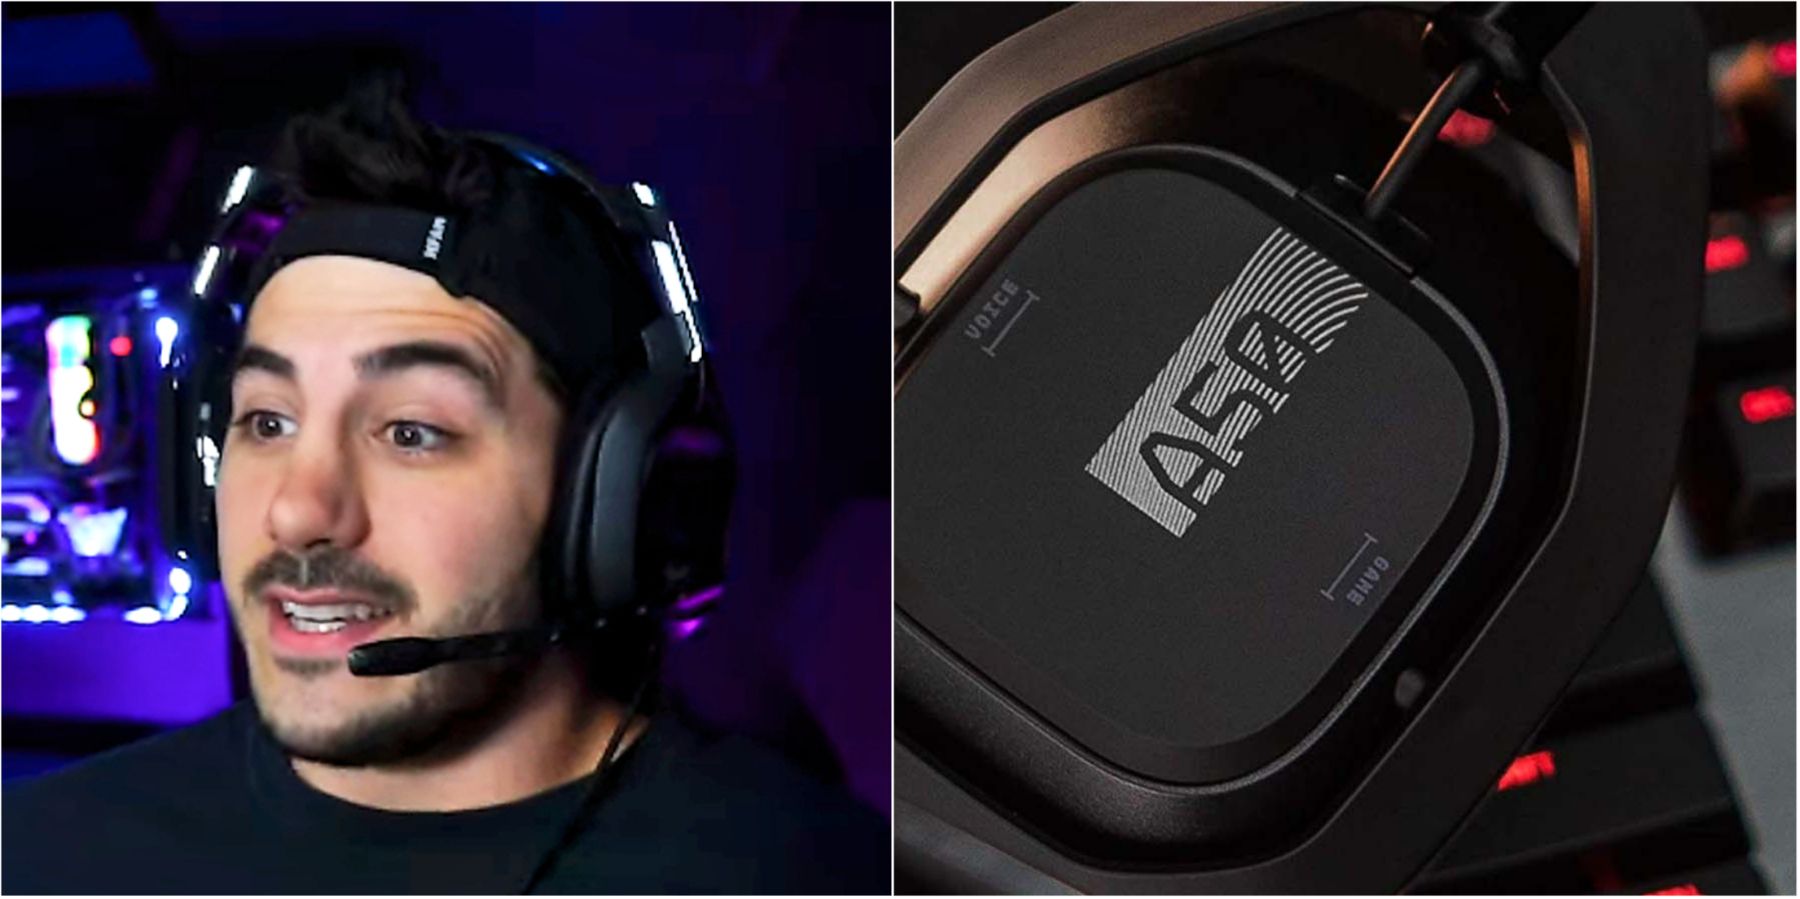 What Gaming Headset Does Nickmercs Use?